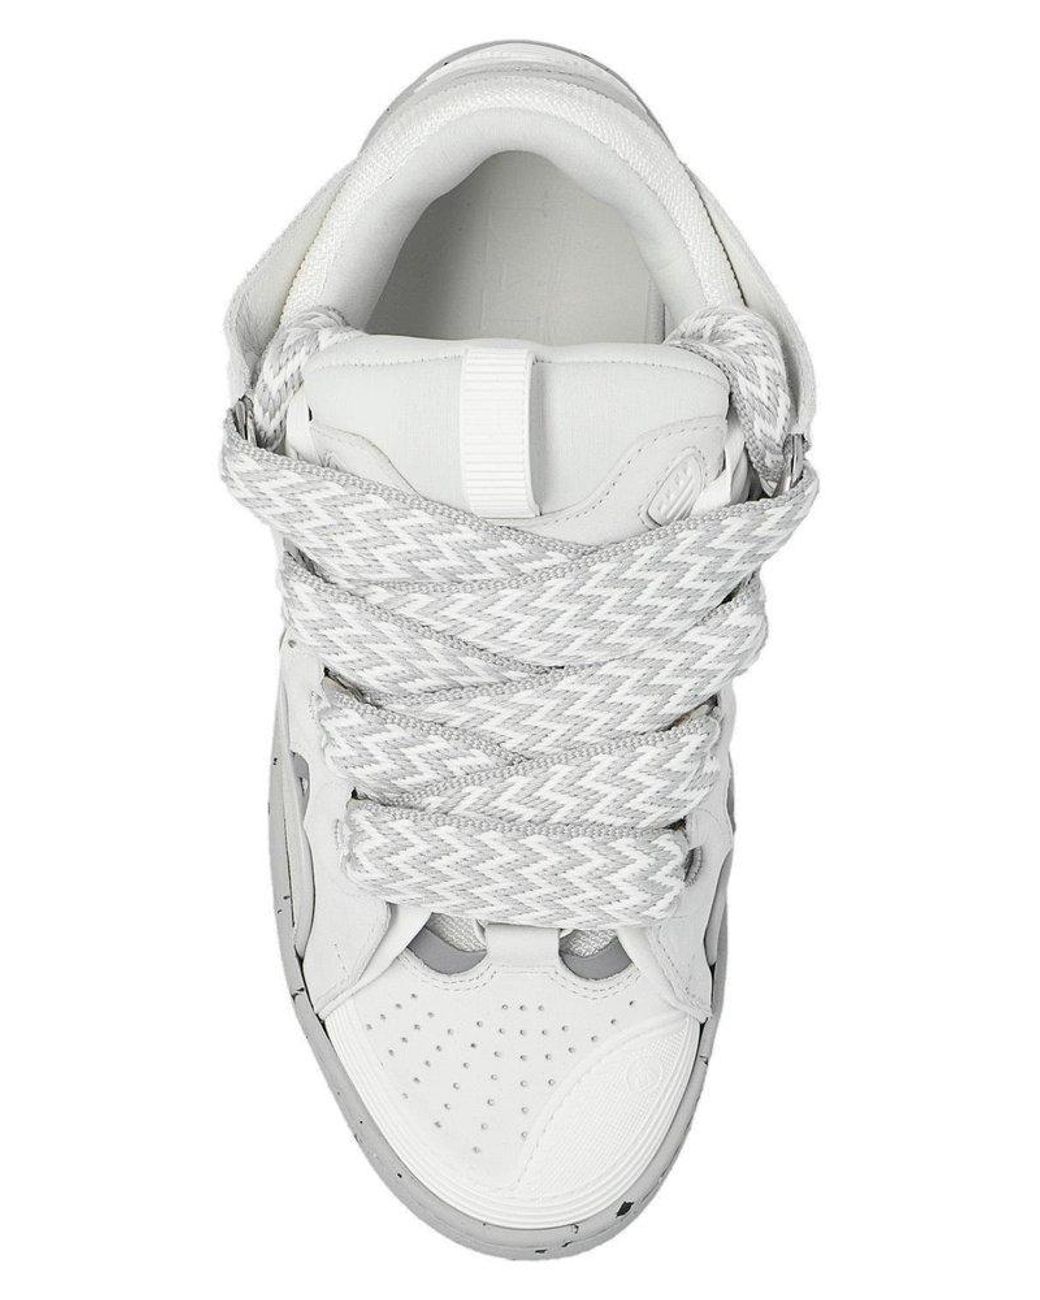 Lanvin Paint Effect Lace-up Sneakers in White | Lyst